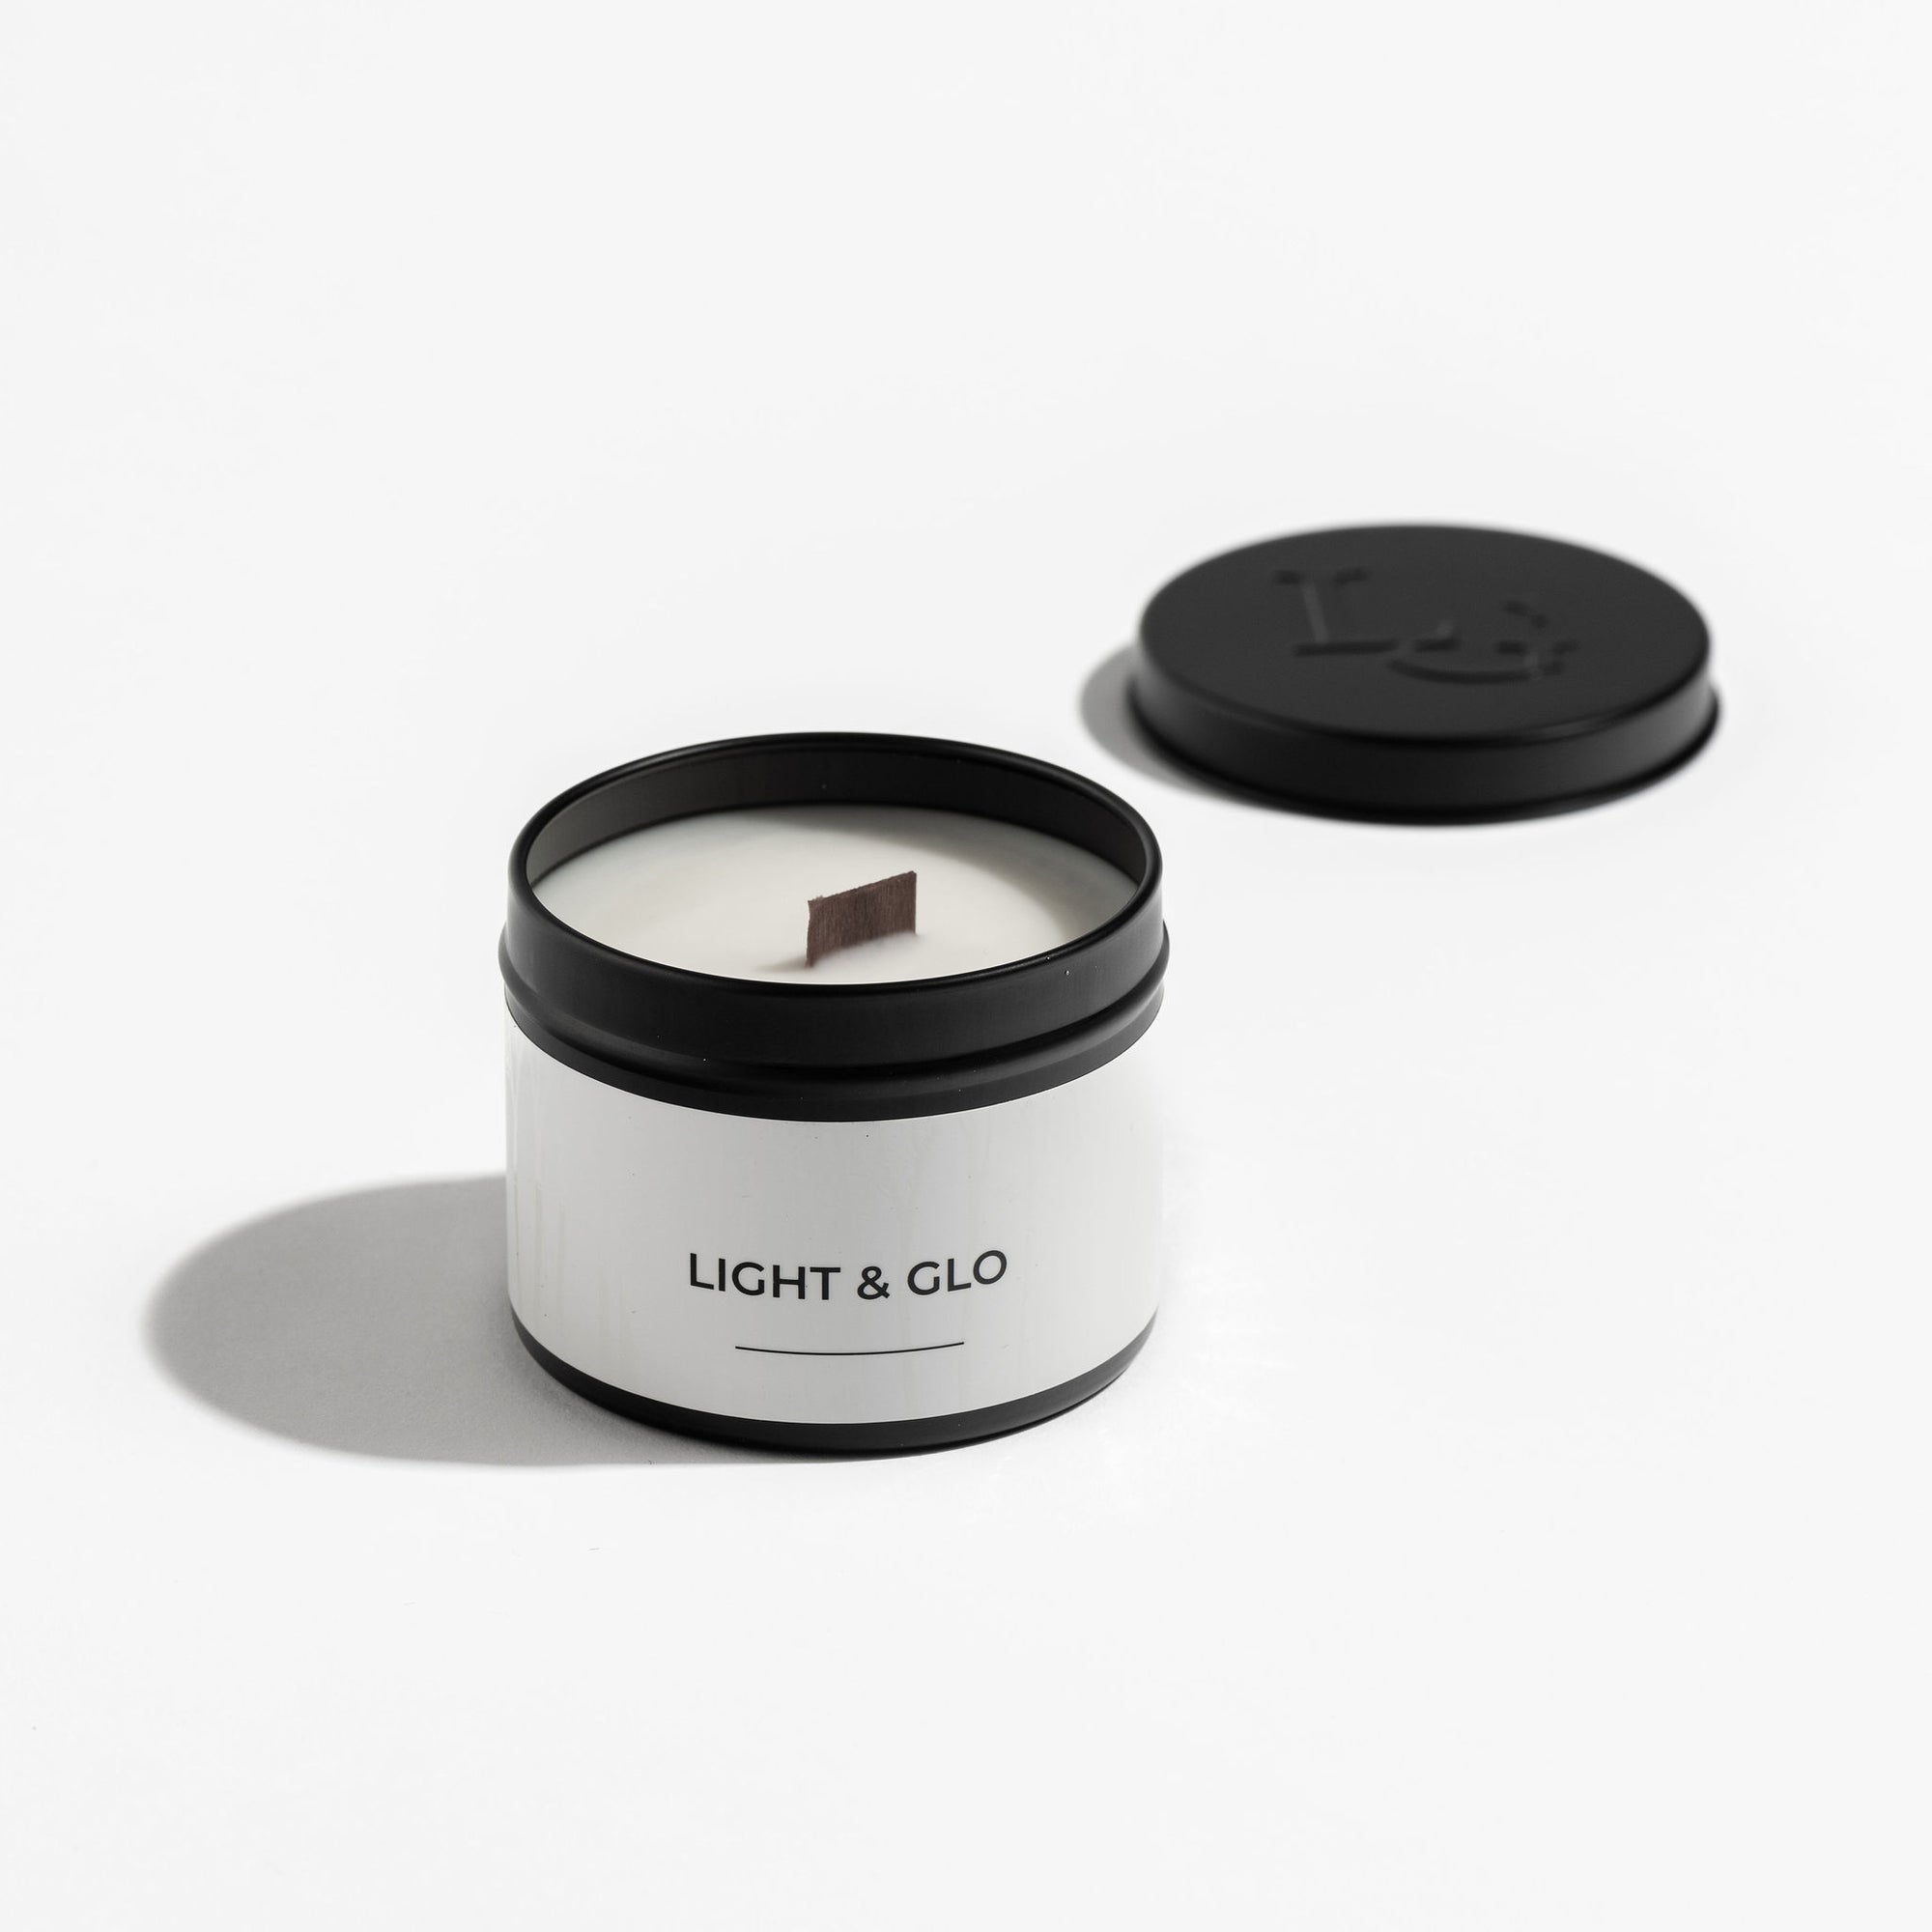 Vanilla Caramel - Monochrome Travel Candle | Luxury Candles & Home Fragrances by Light + Glo